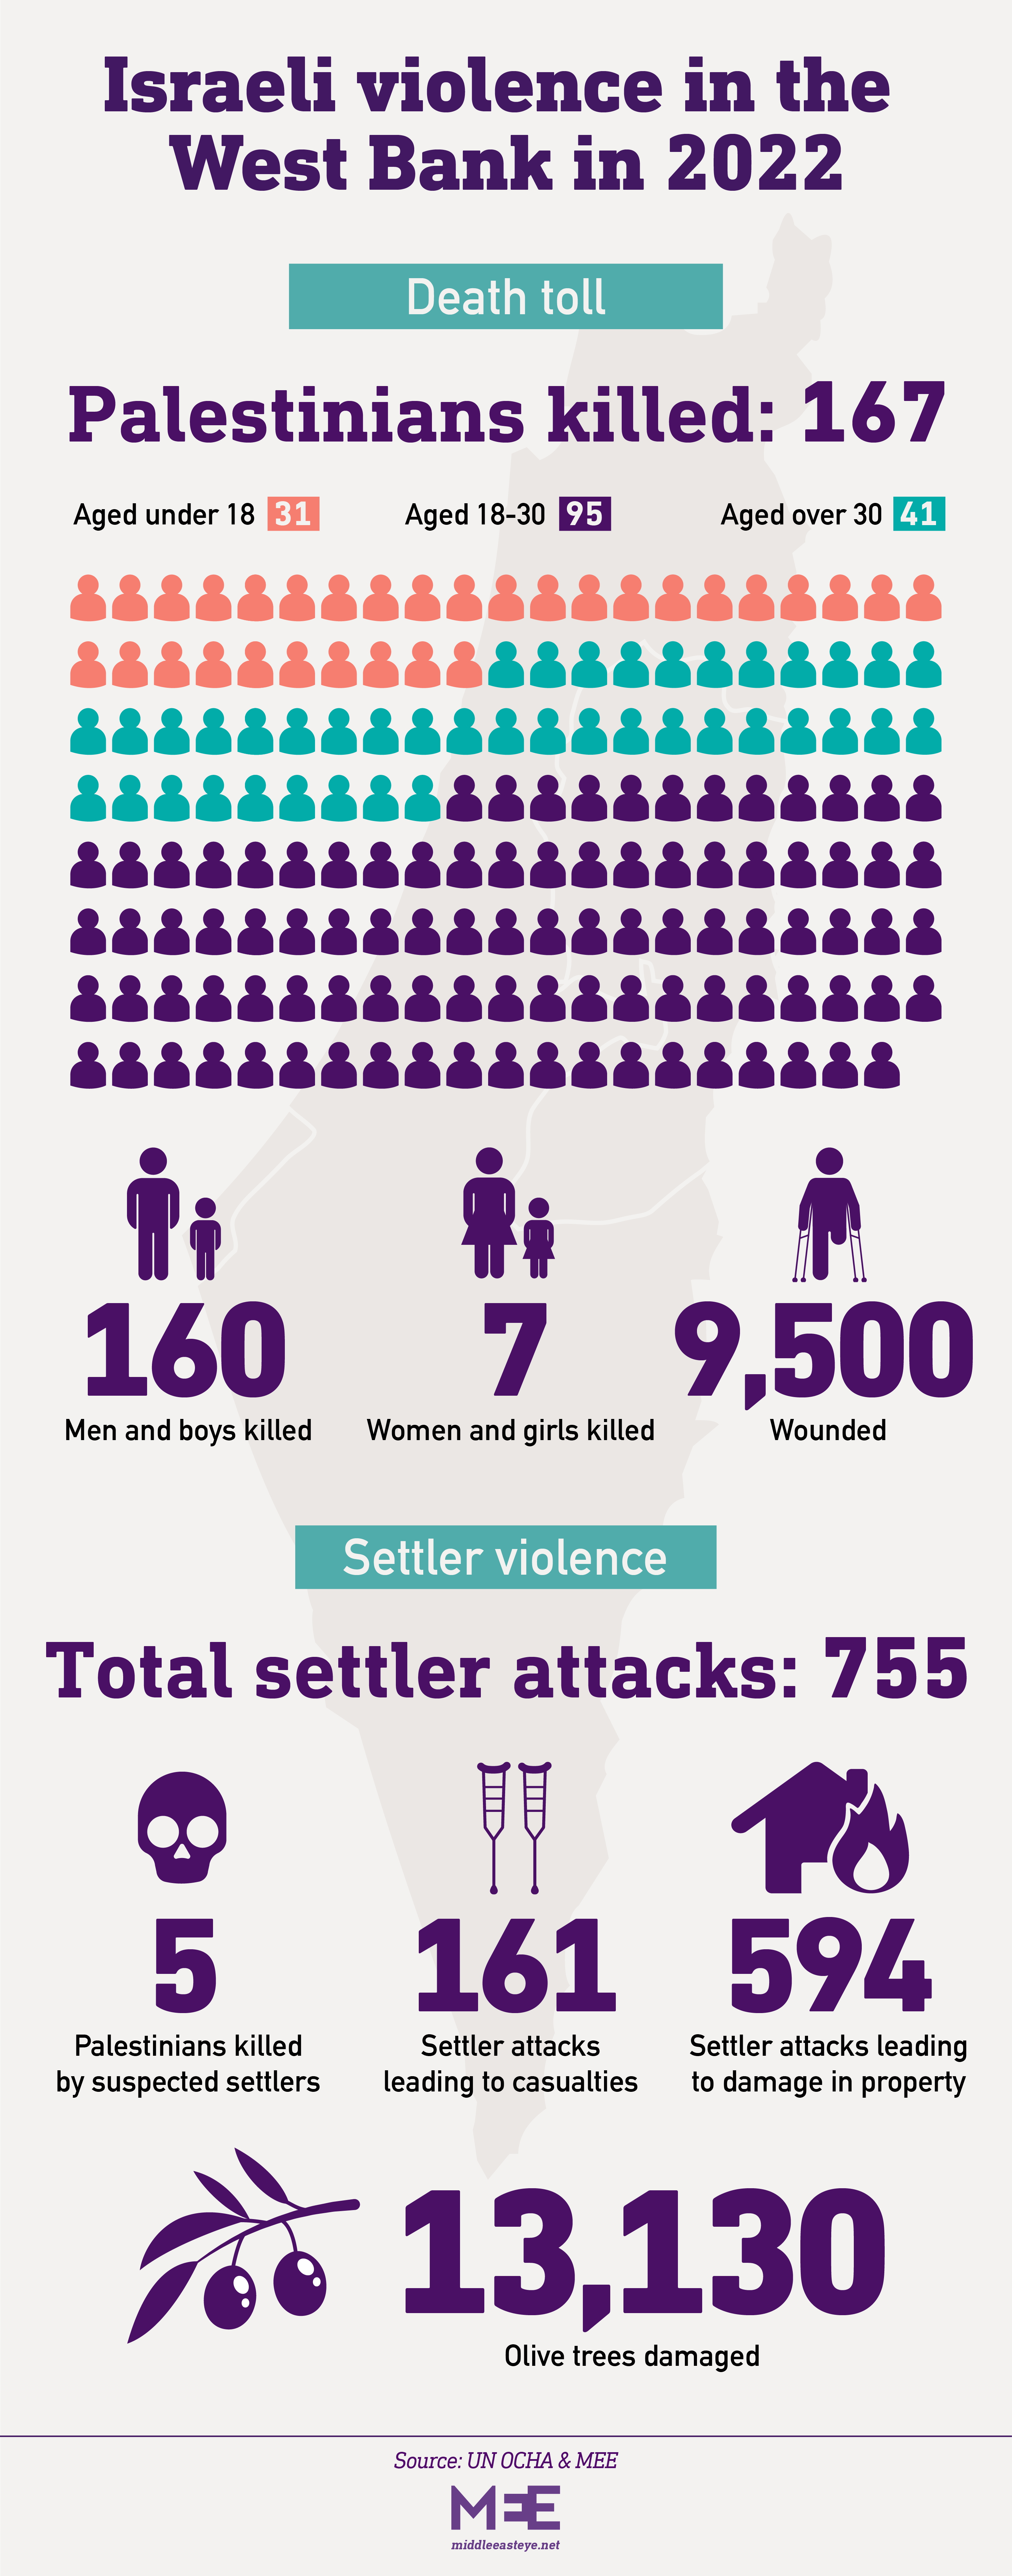 Palestinian death toll and settler attacks 2022